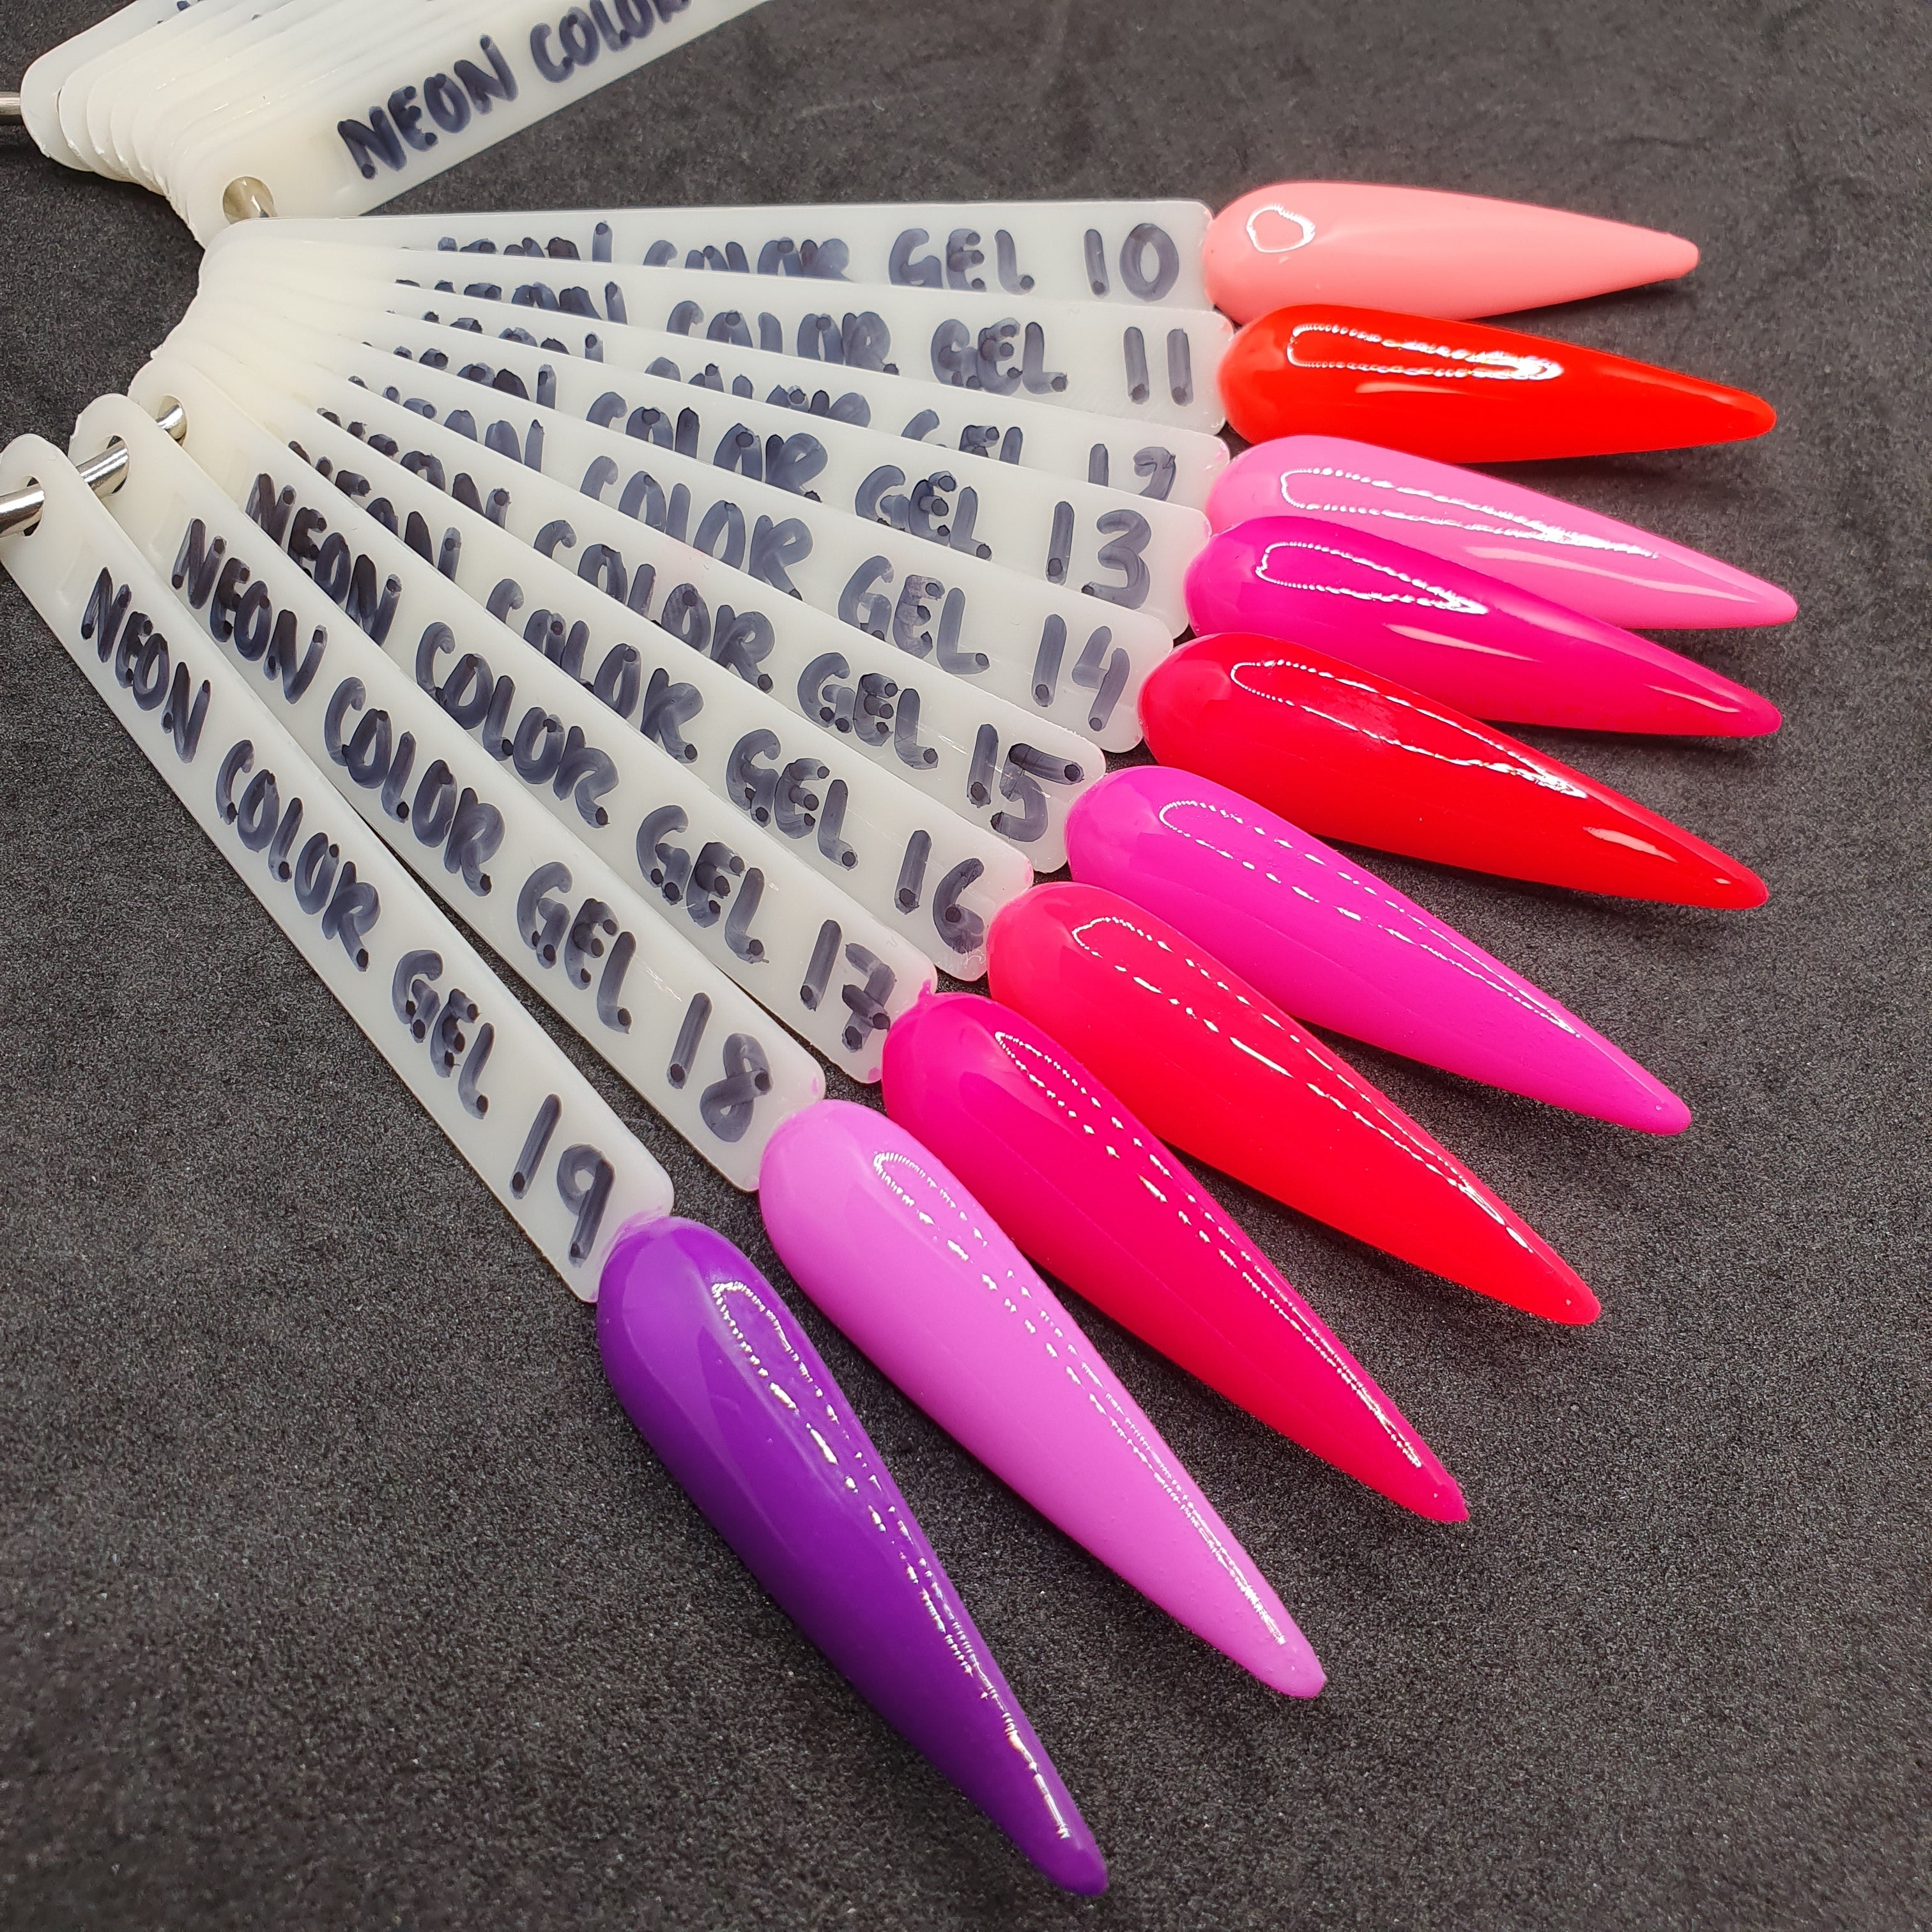 NEW - GND NEON GEL COLOR - 12